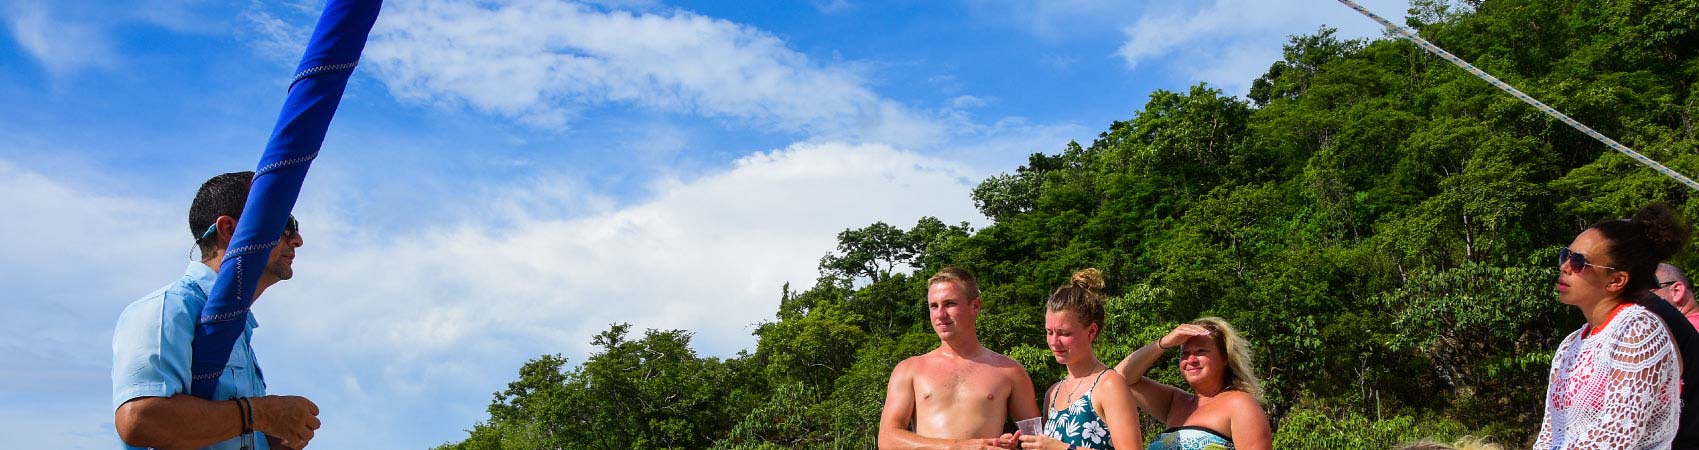 The basic idea of holidaying in Costa Rica embodies the best holiday ever